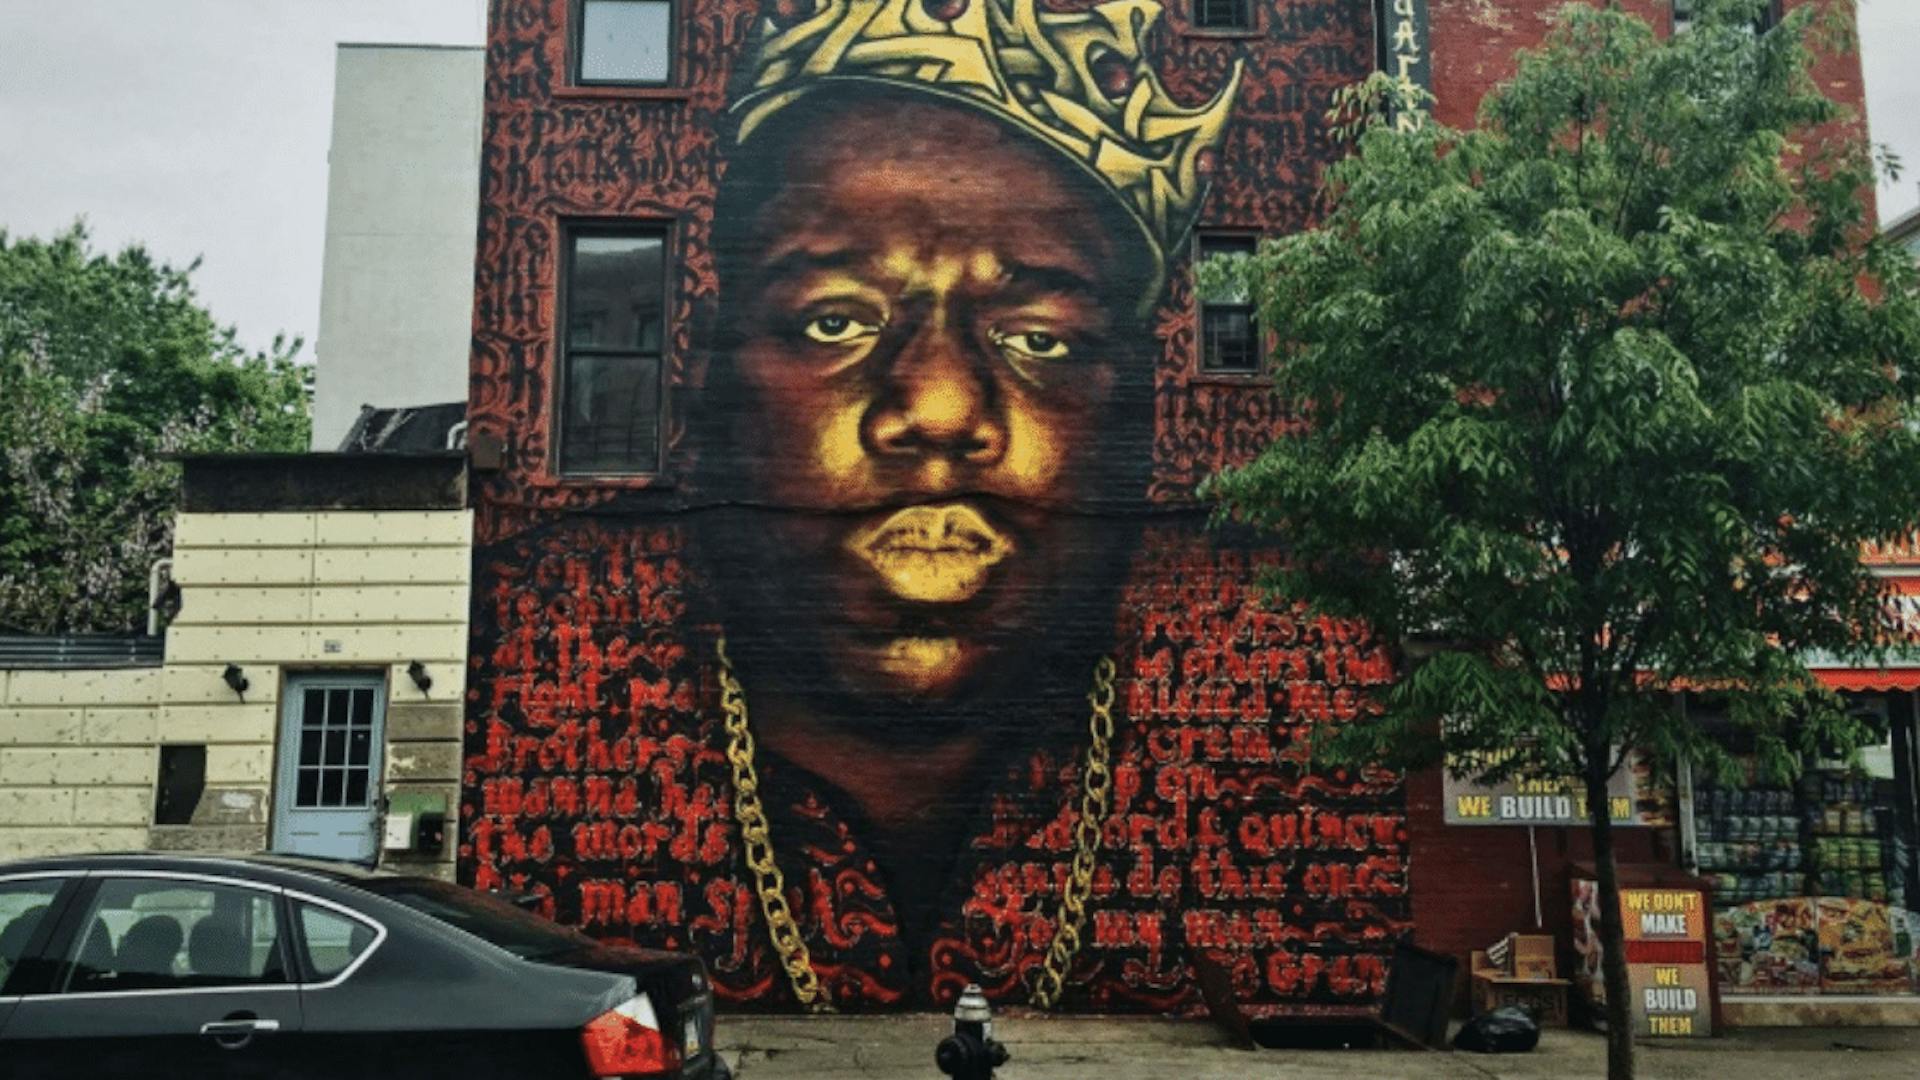 A mural of The Notorious BIG on Bedford Ave and Quincy Street by Artists Scoot Zimmerman and Maoufal Alaoui.